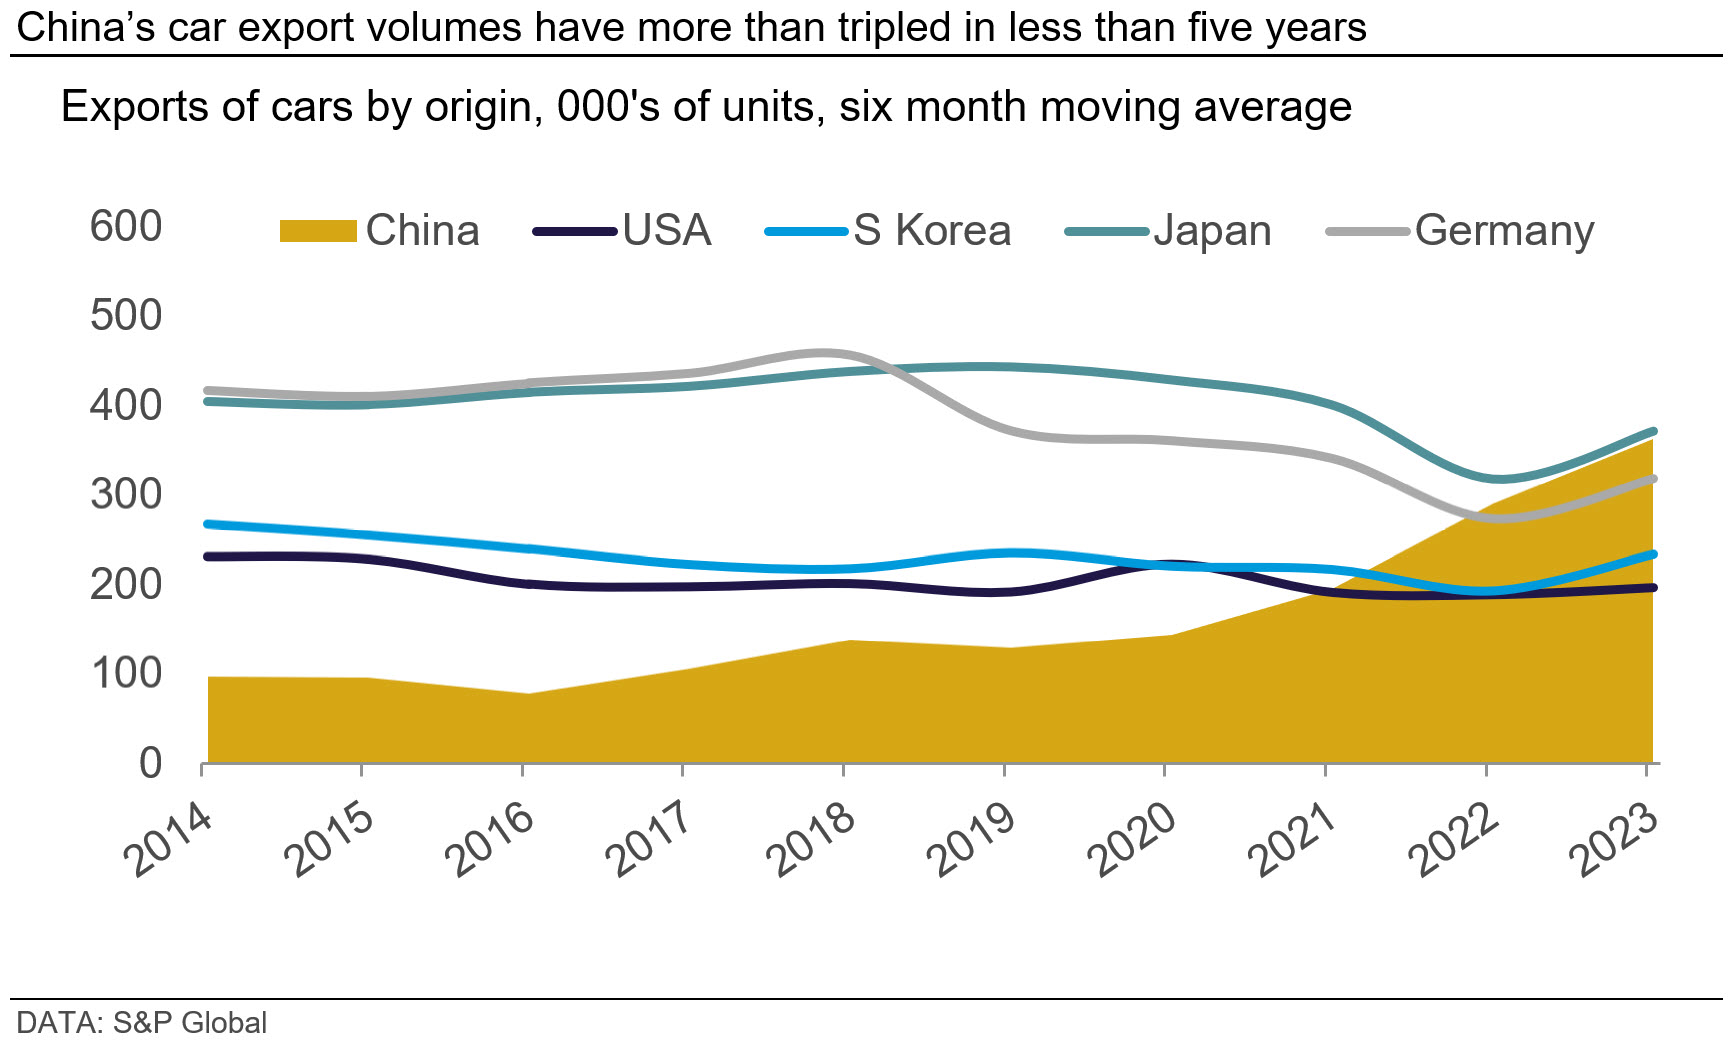 Graph showing that China’s car export volumes have more than tripled